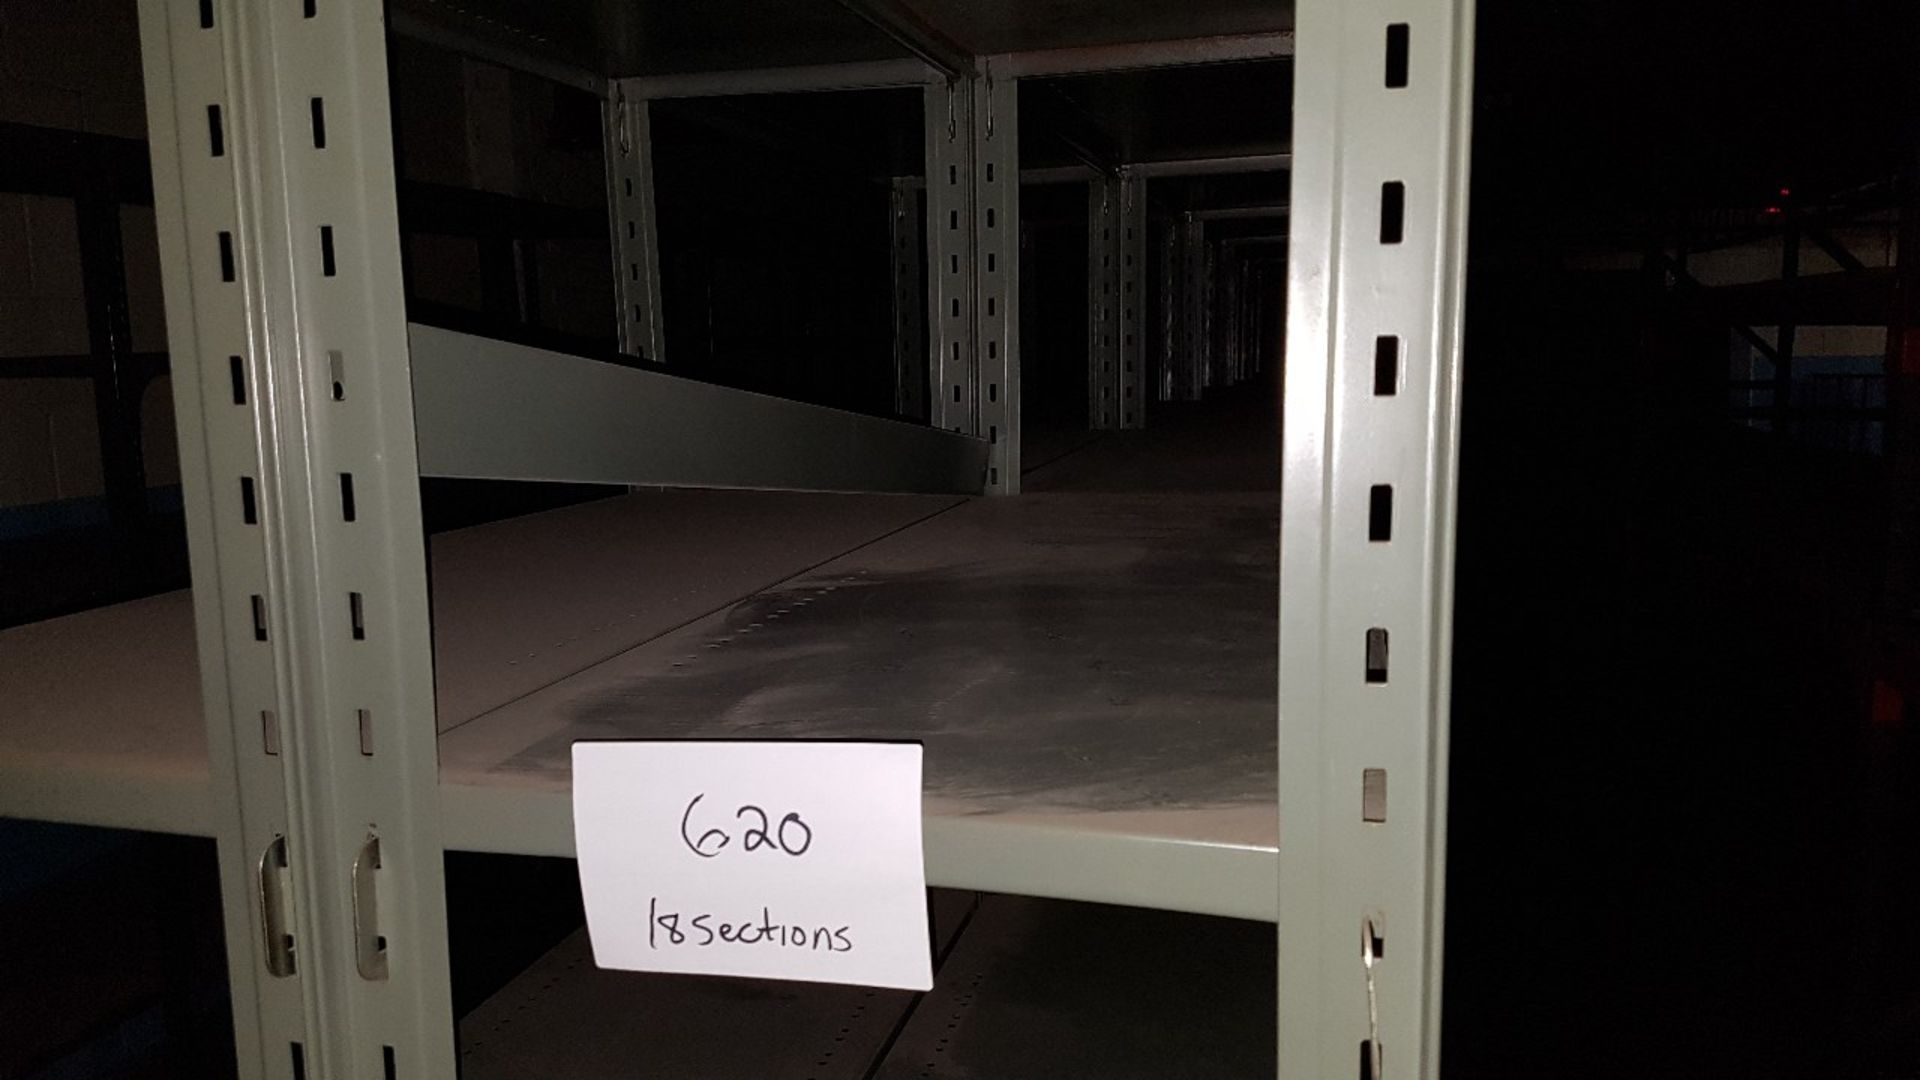 METAL SHELVING - 18 SECTIONS